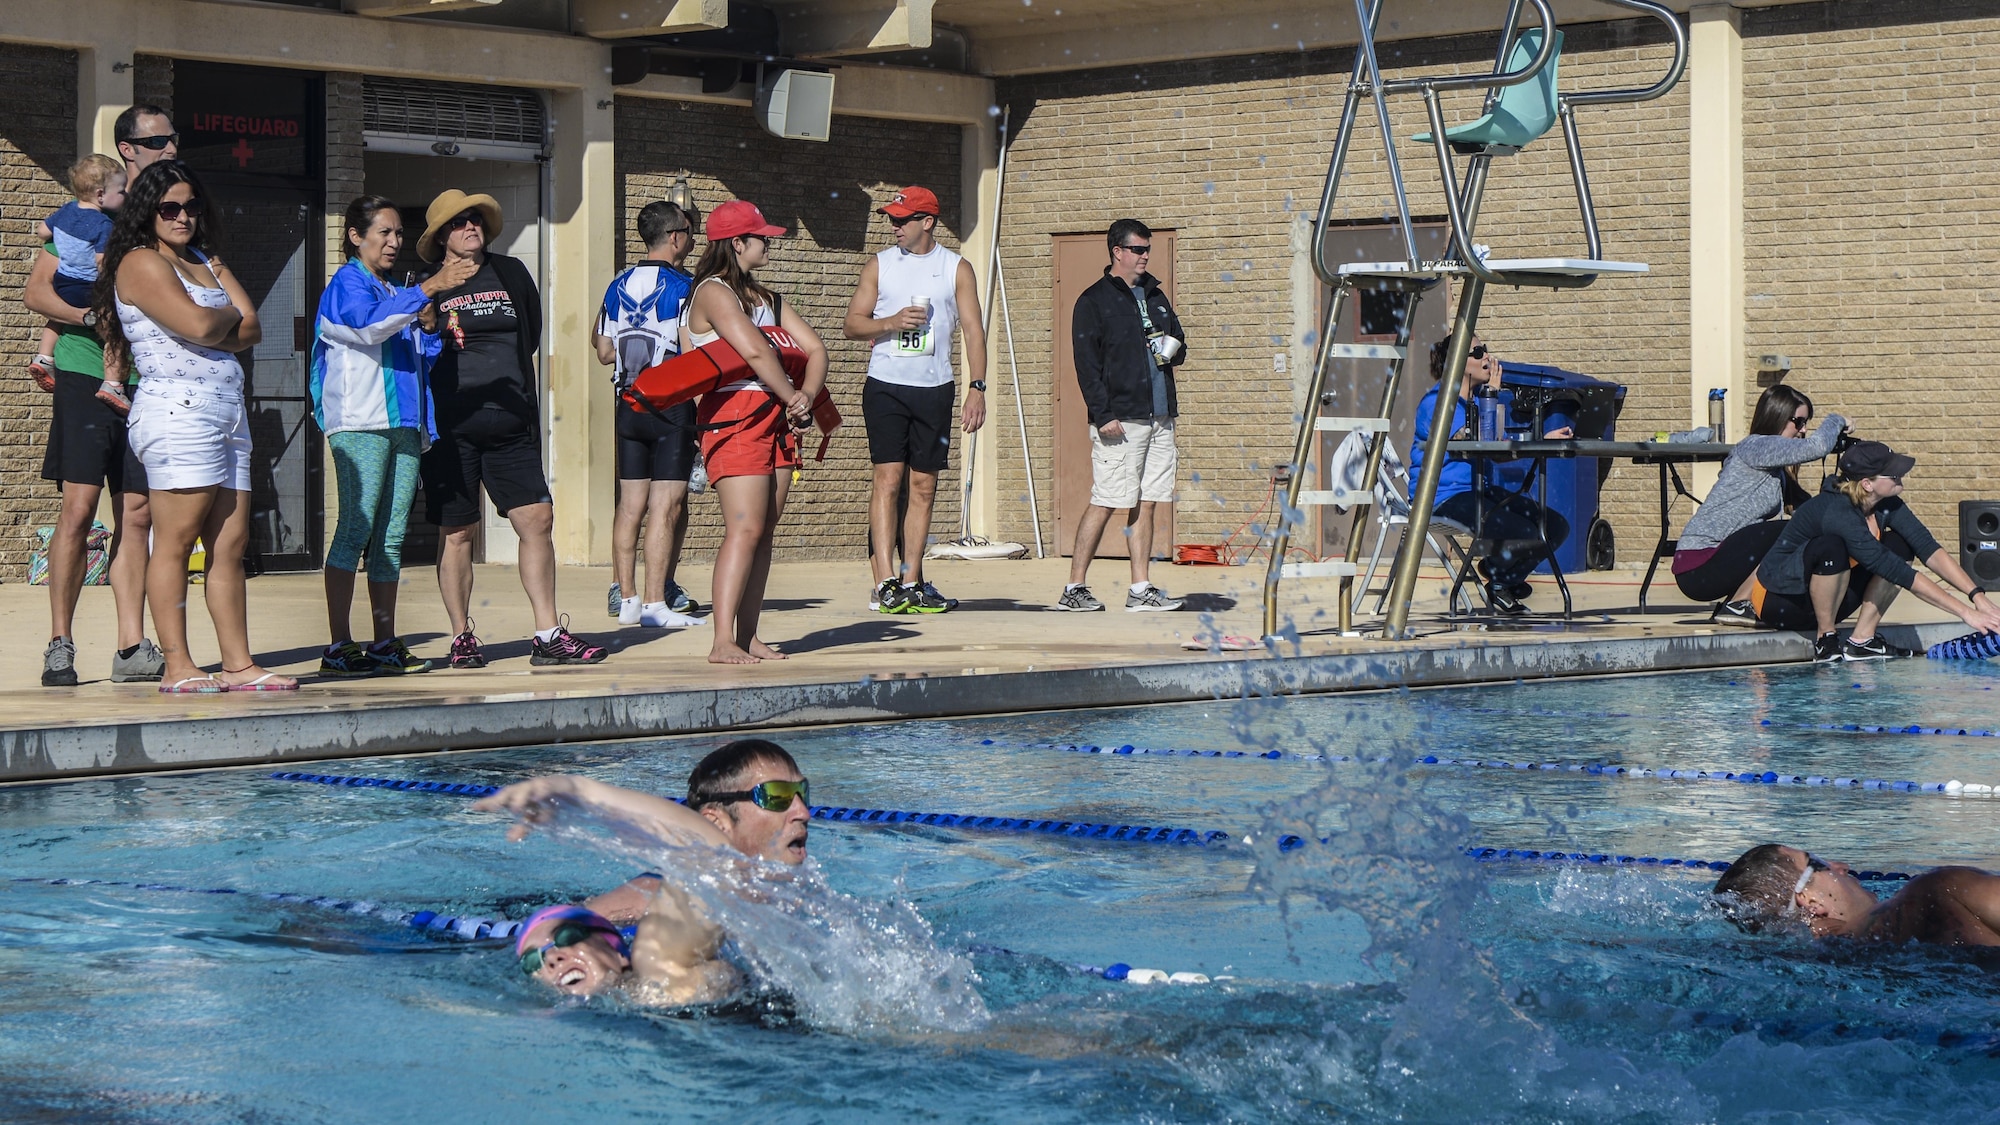 Athletes compete in the 700 meter swimming portion of Holloman’s eighth annual Monster Triathlon at Holloman Air Force Base, N.M. on Sept. 17, 2016. Light refreshments and snacks were provided to race participants by 49th Force Support Squadron event staff. (U.S. Air Force photo by Airman 1st Class Alexis P. Docherty)